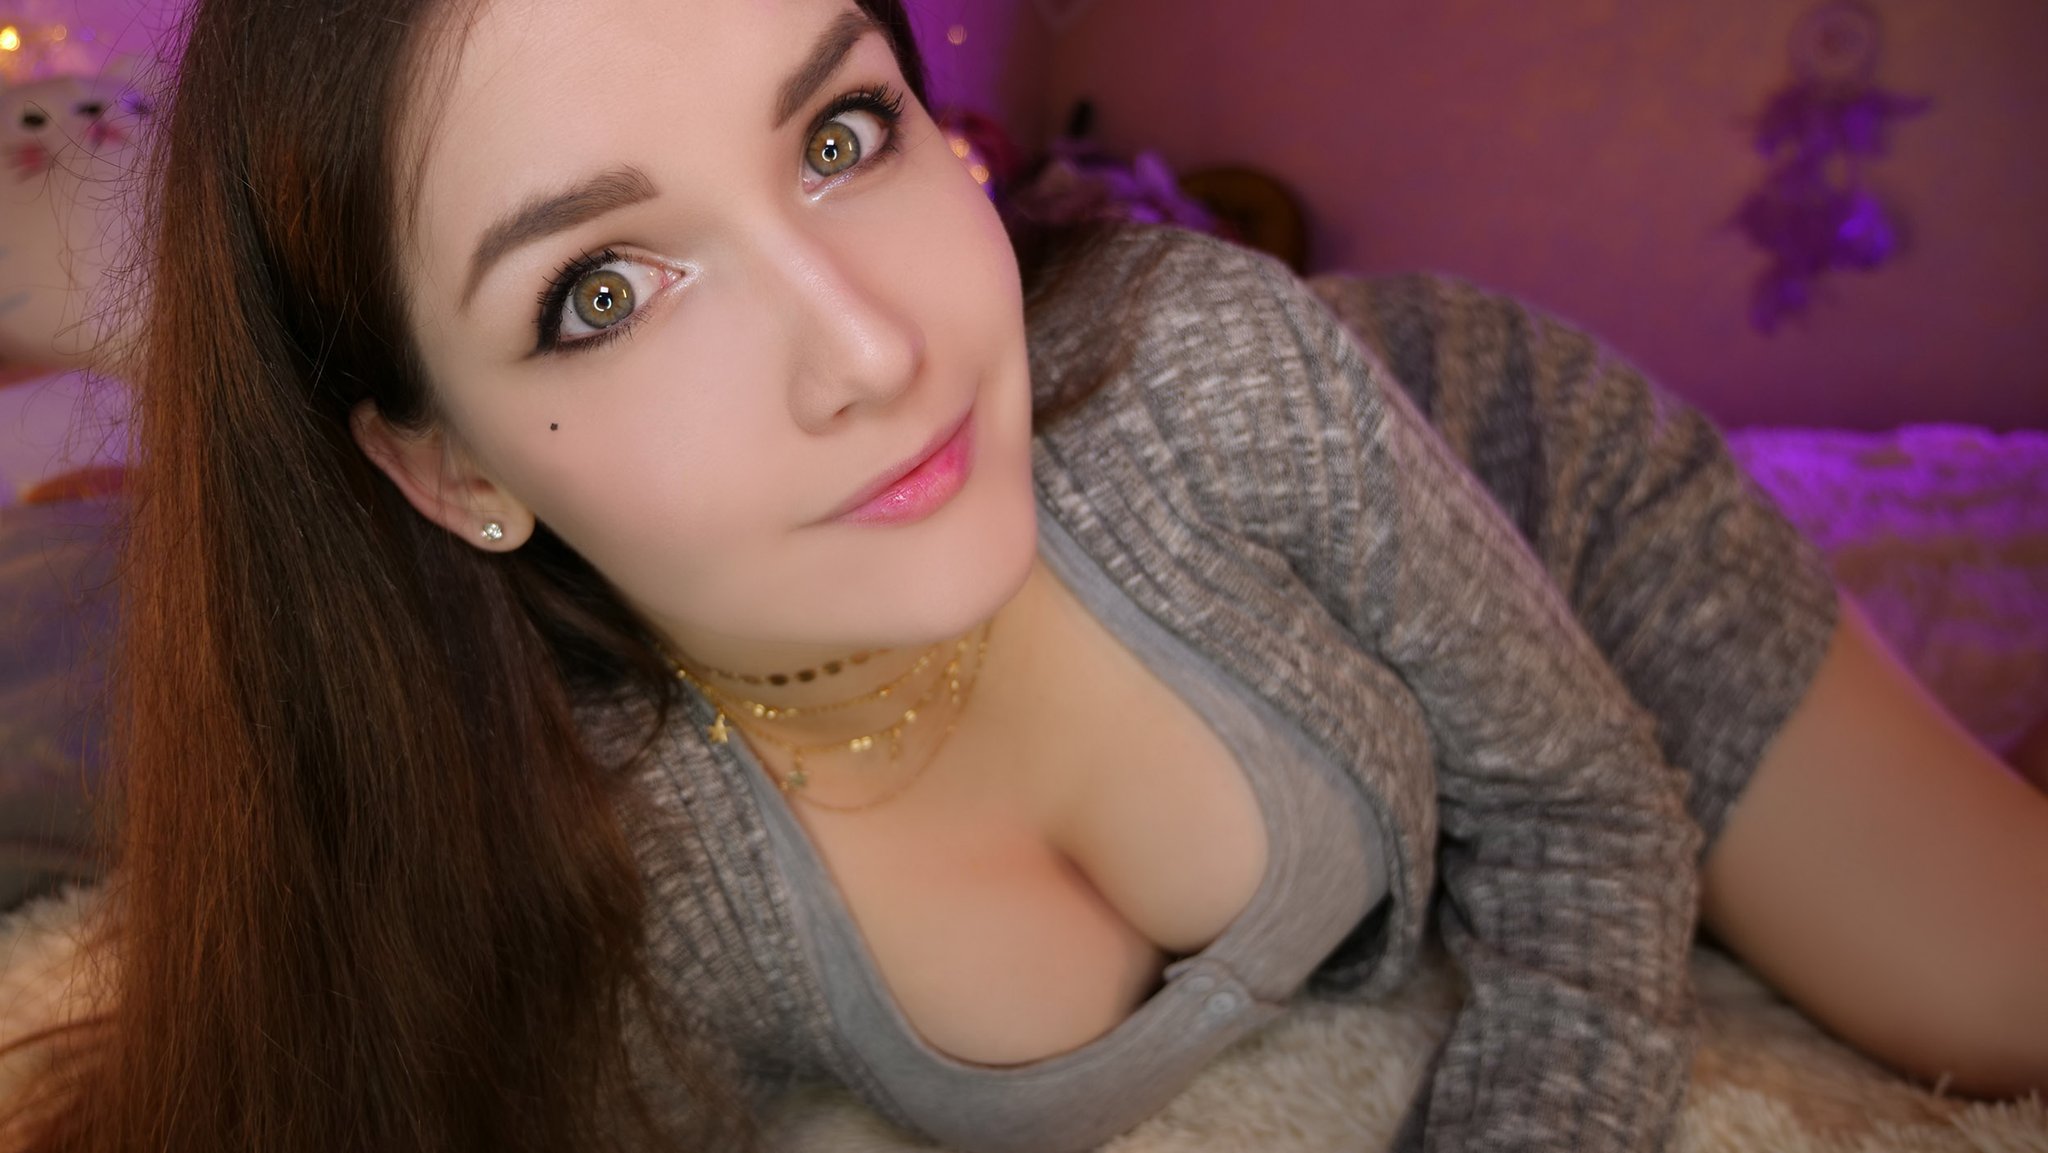 ASMR Video - Planning New Year with you 🎄(Continuation) https://t.co/4yjDV...